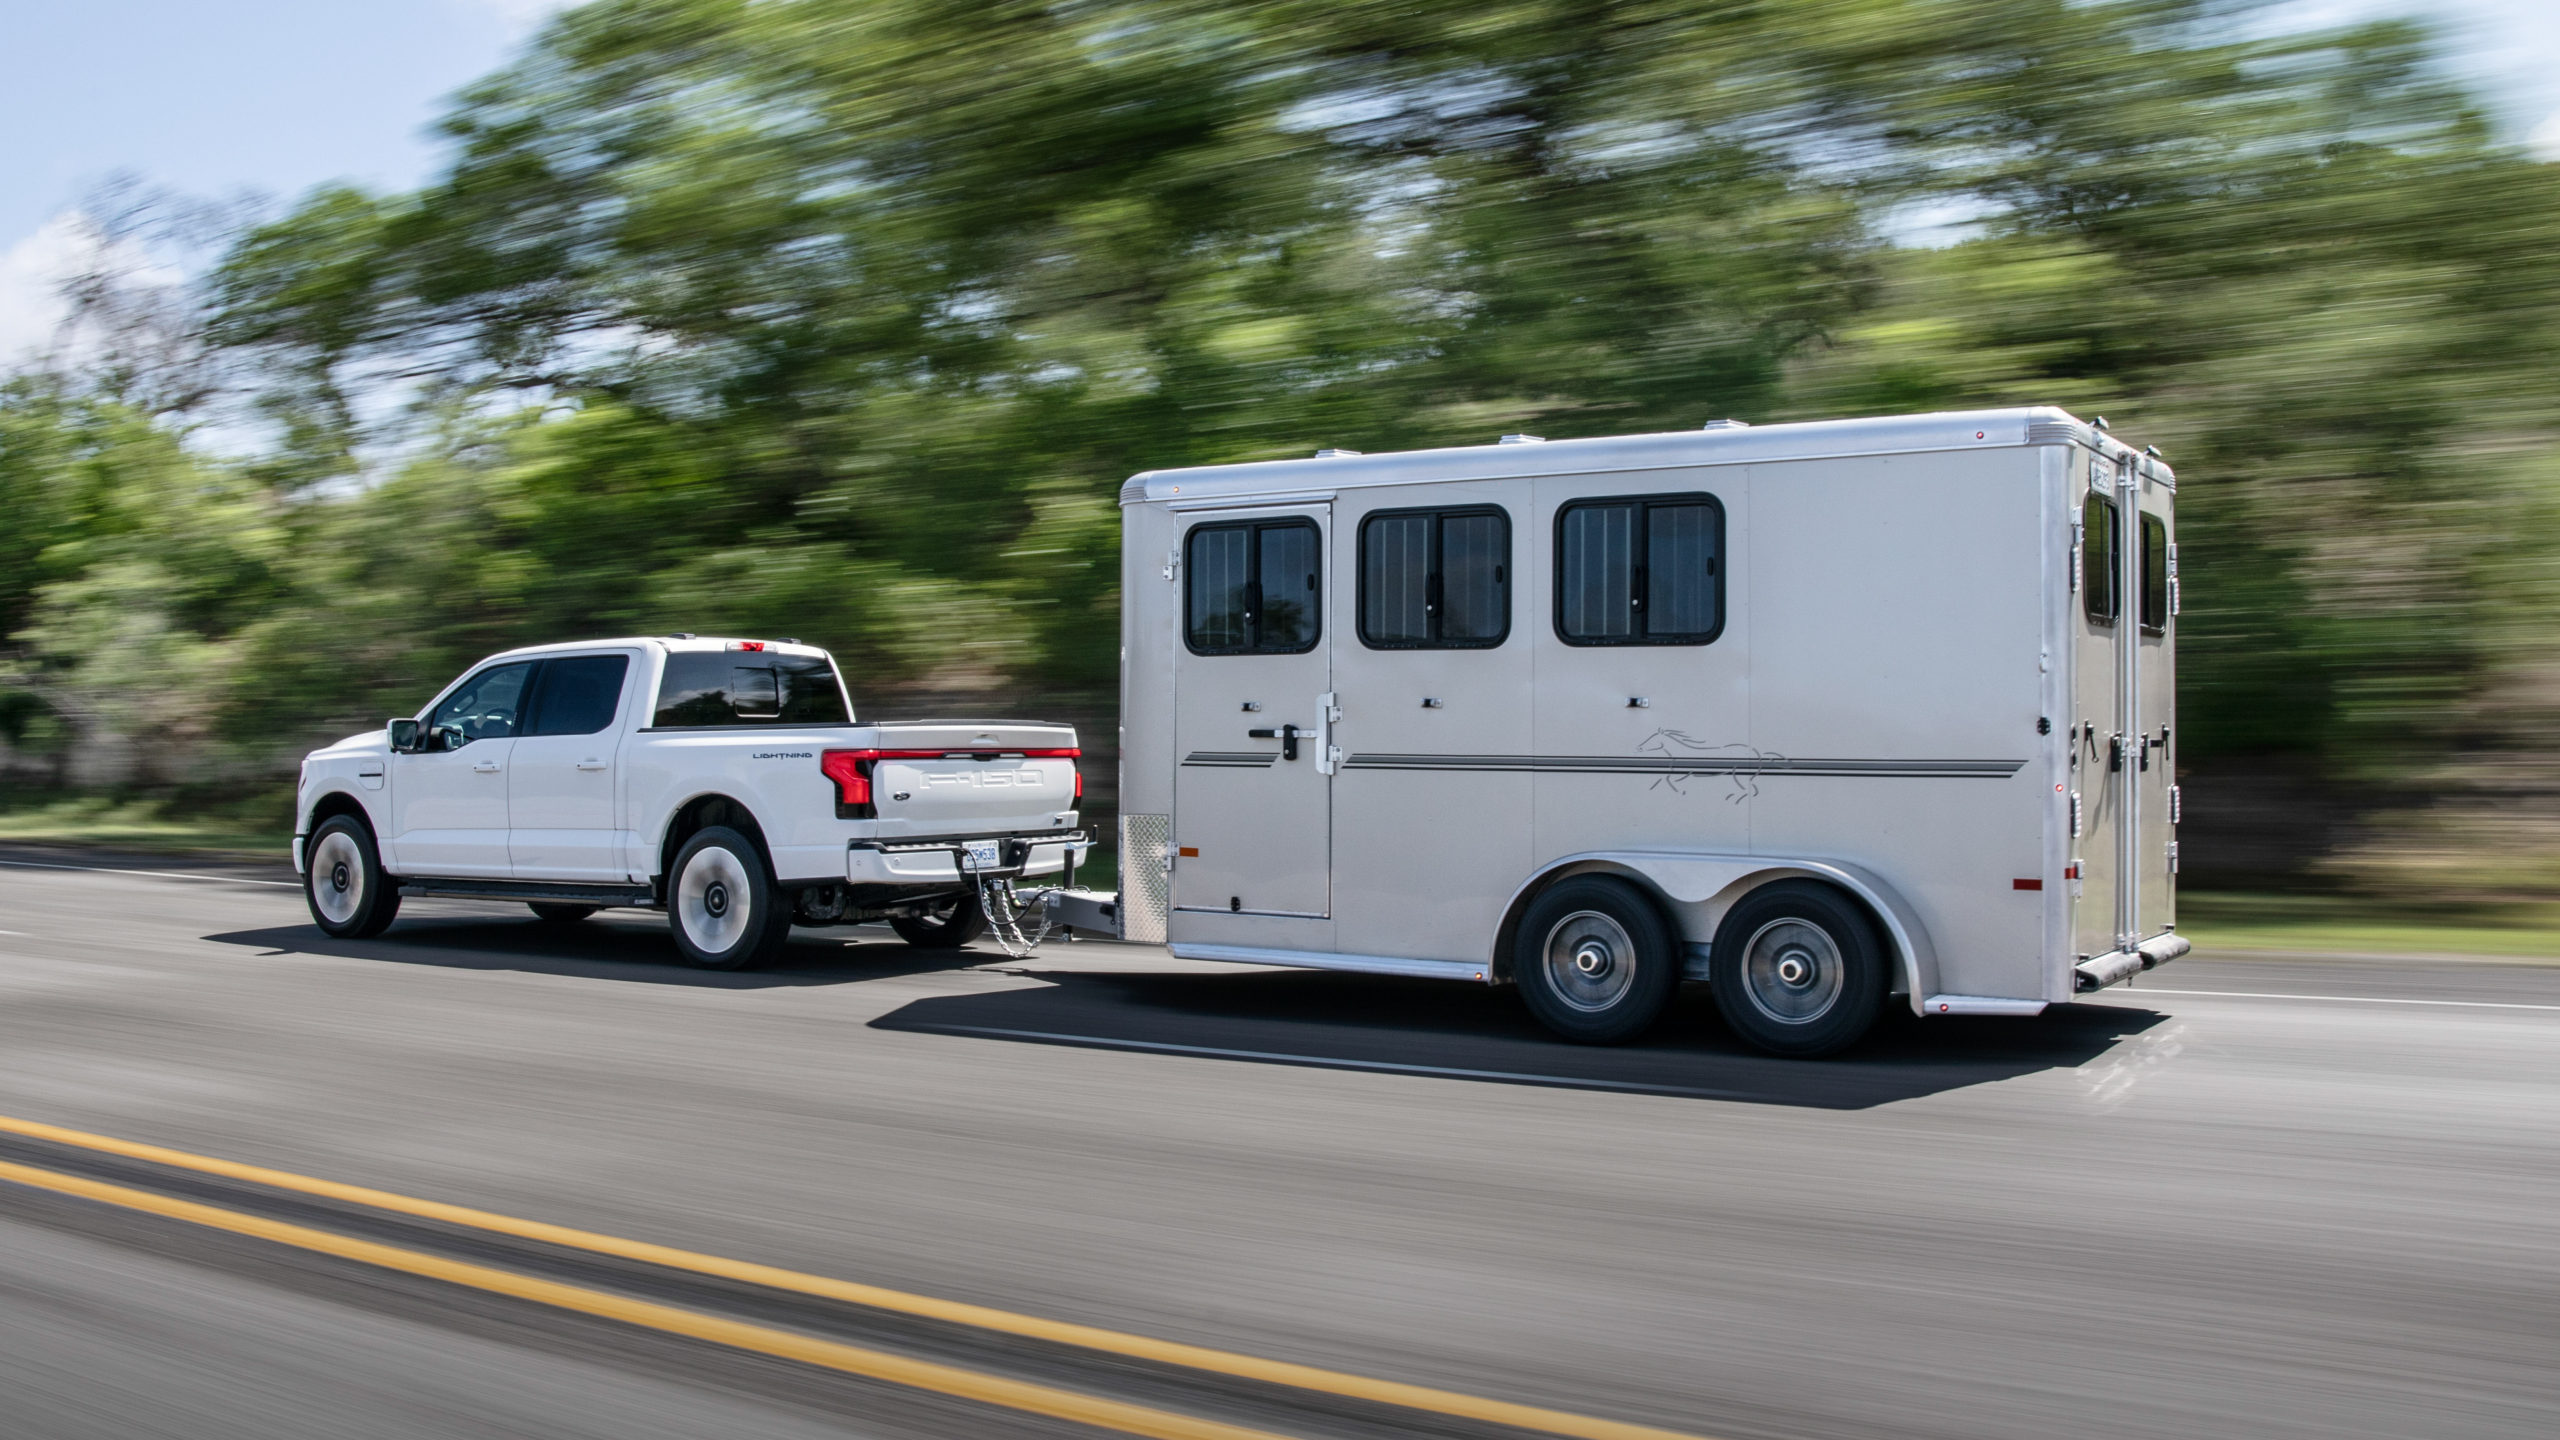 Can it tow? New electric vehicle towing capacities for 2022